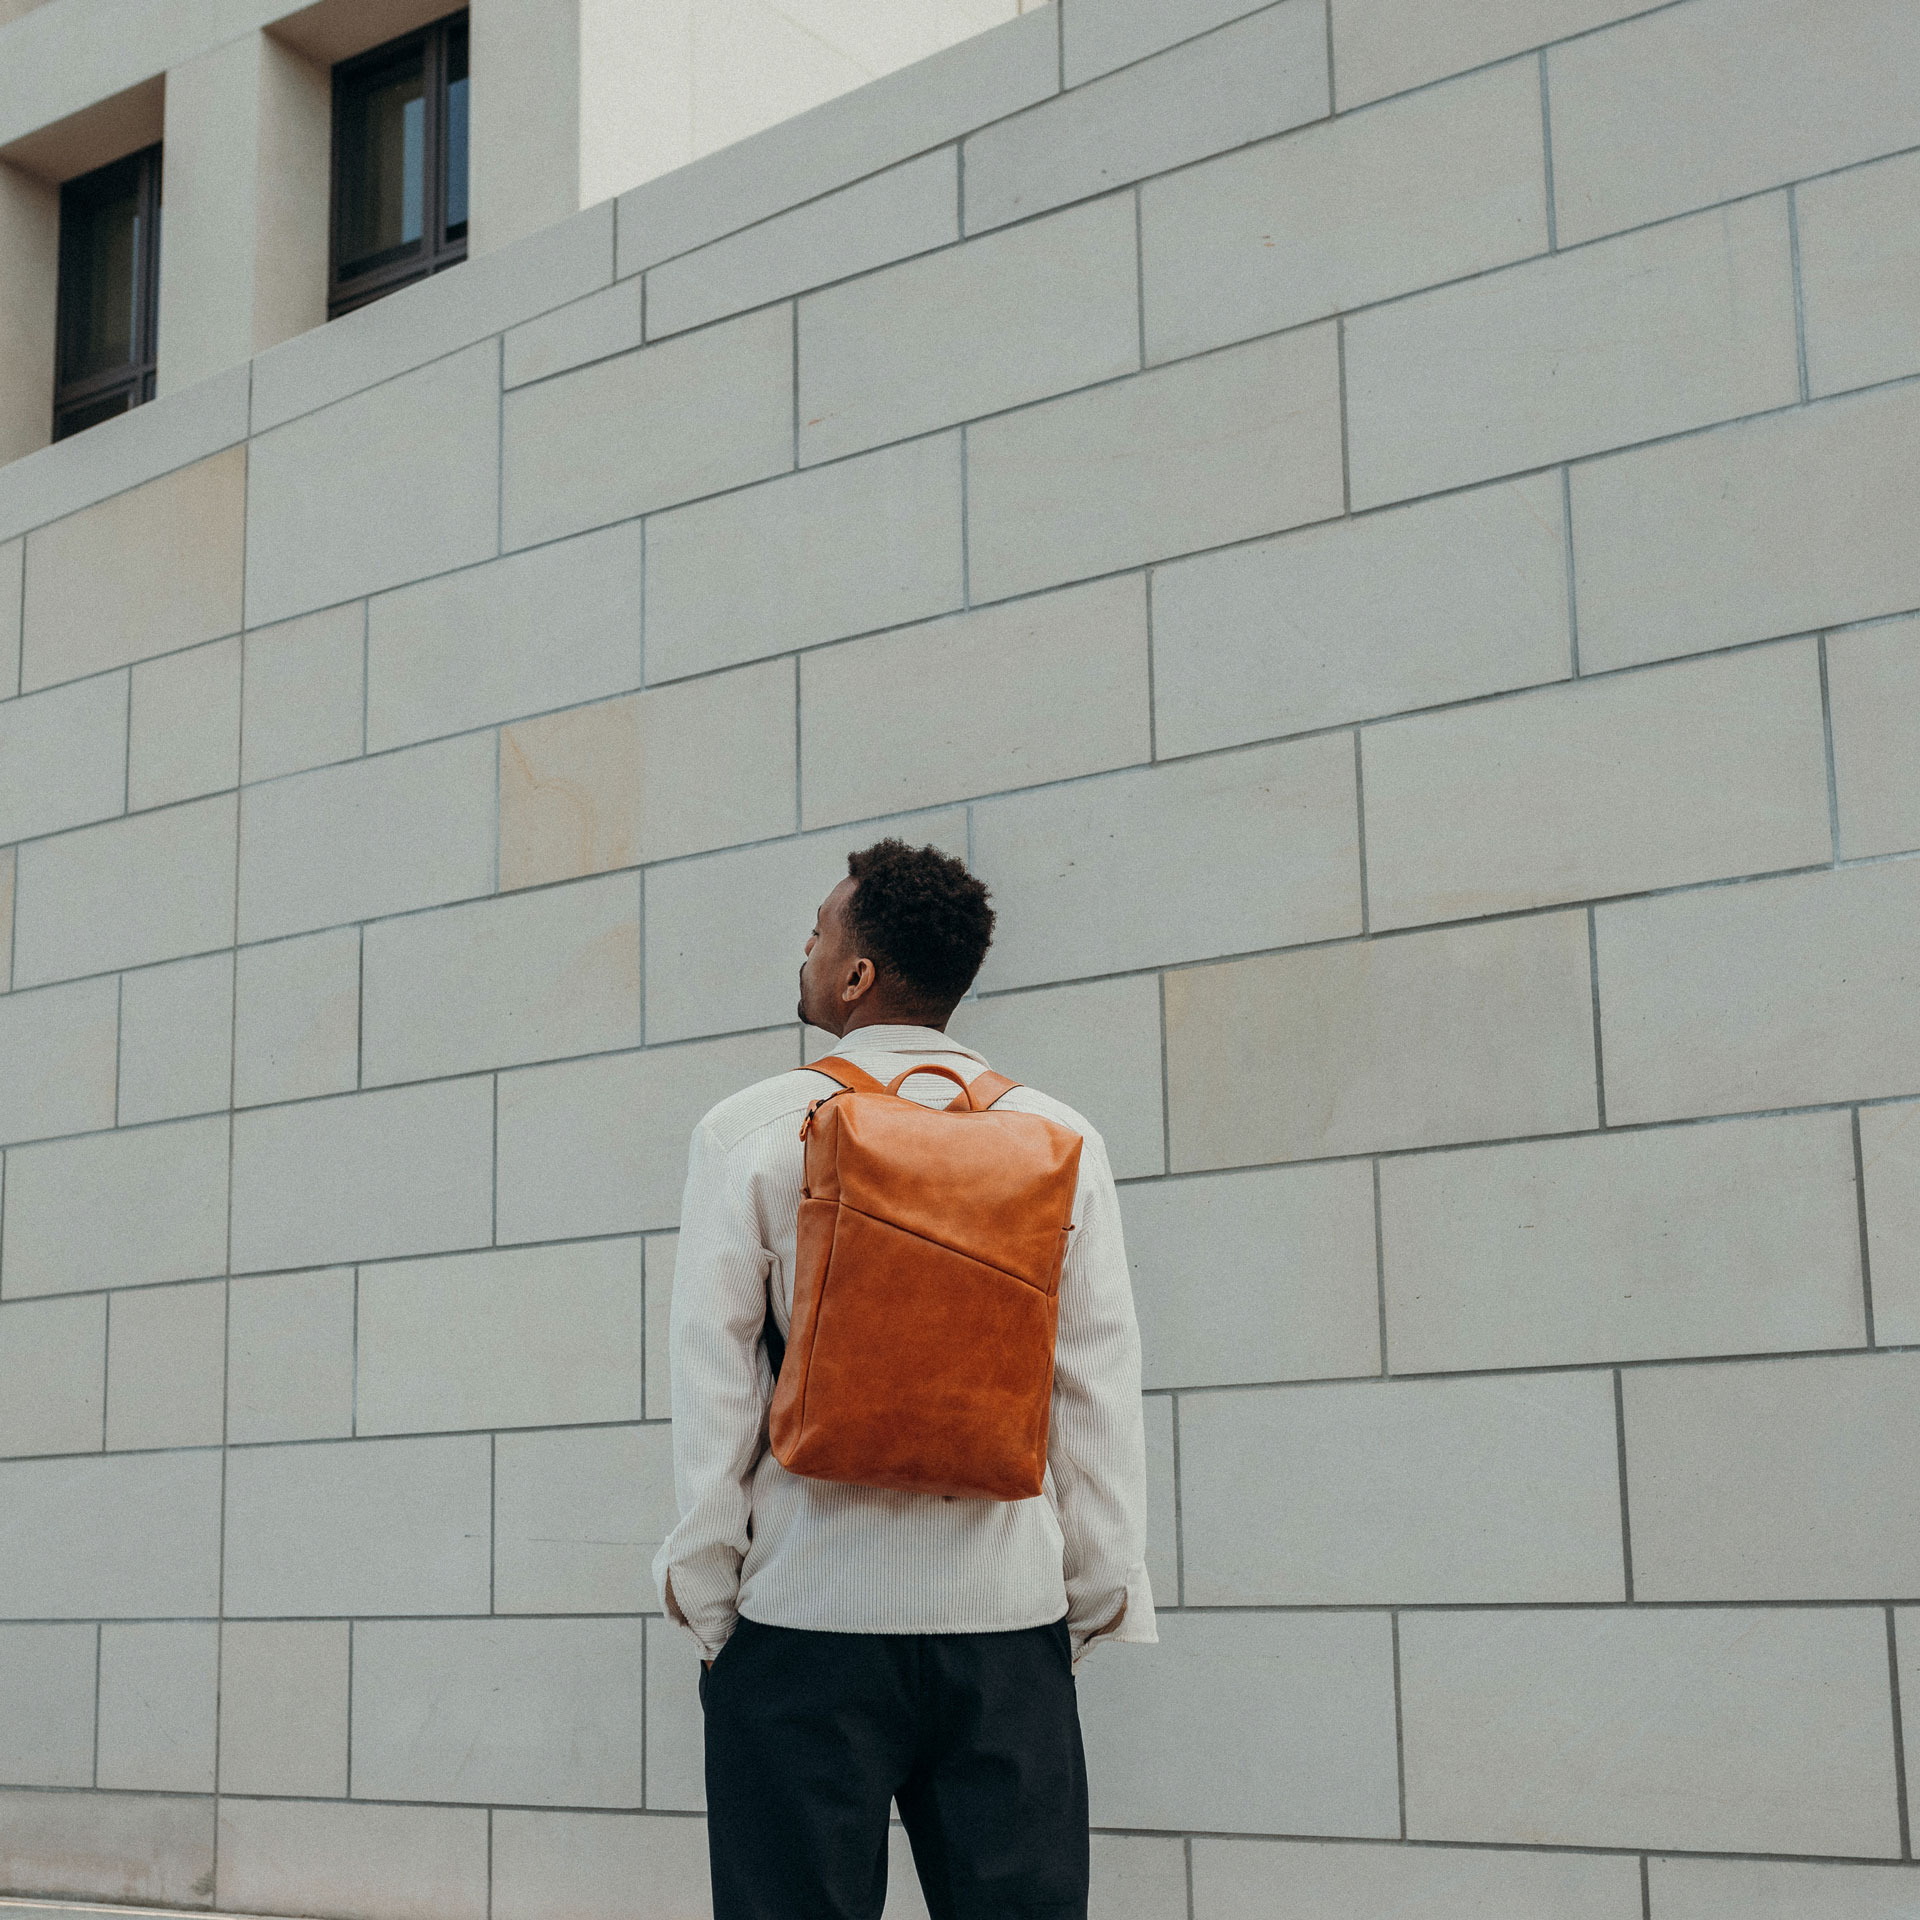 Our model Mack in the canyons of a city - on his back he carries our Daypack NEO Large.